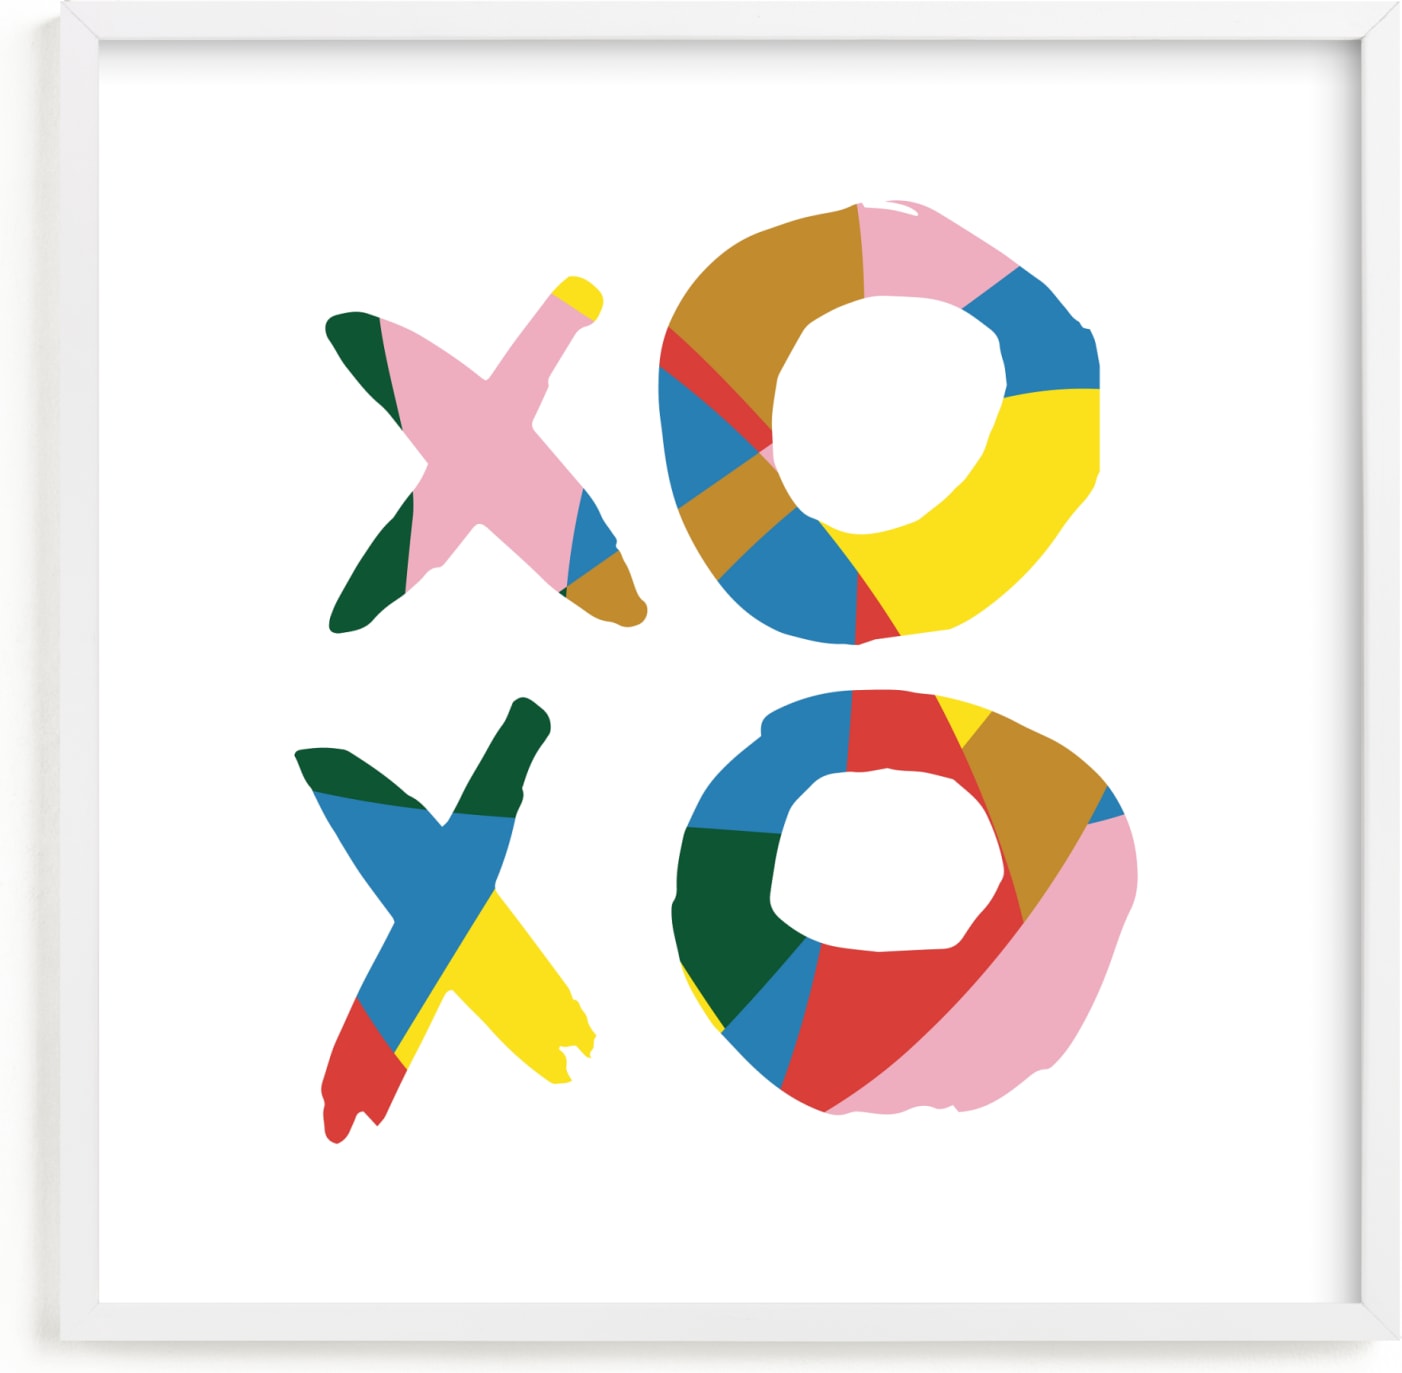 This is a blue kids wall art by Christina Flowers called xoxo - be bright.